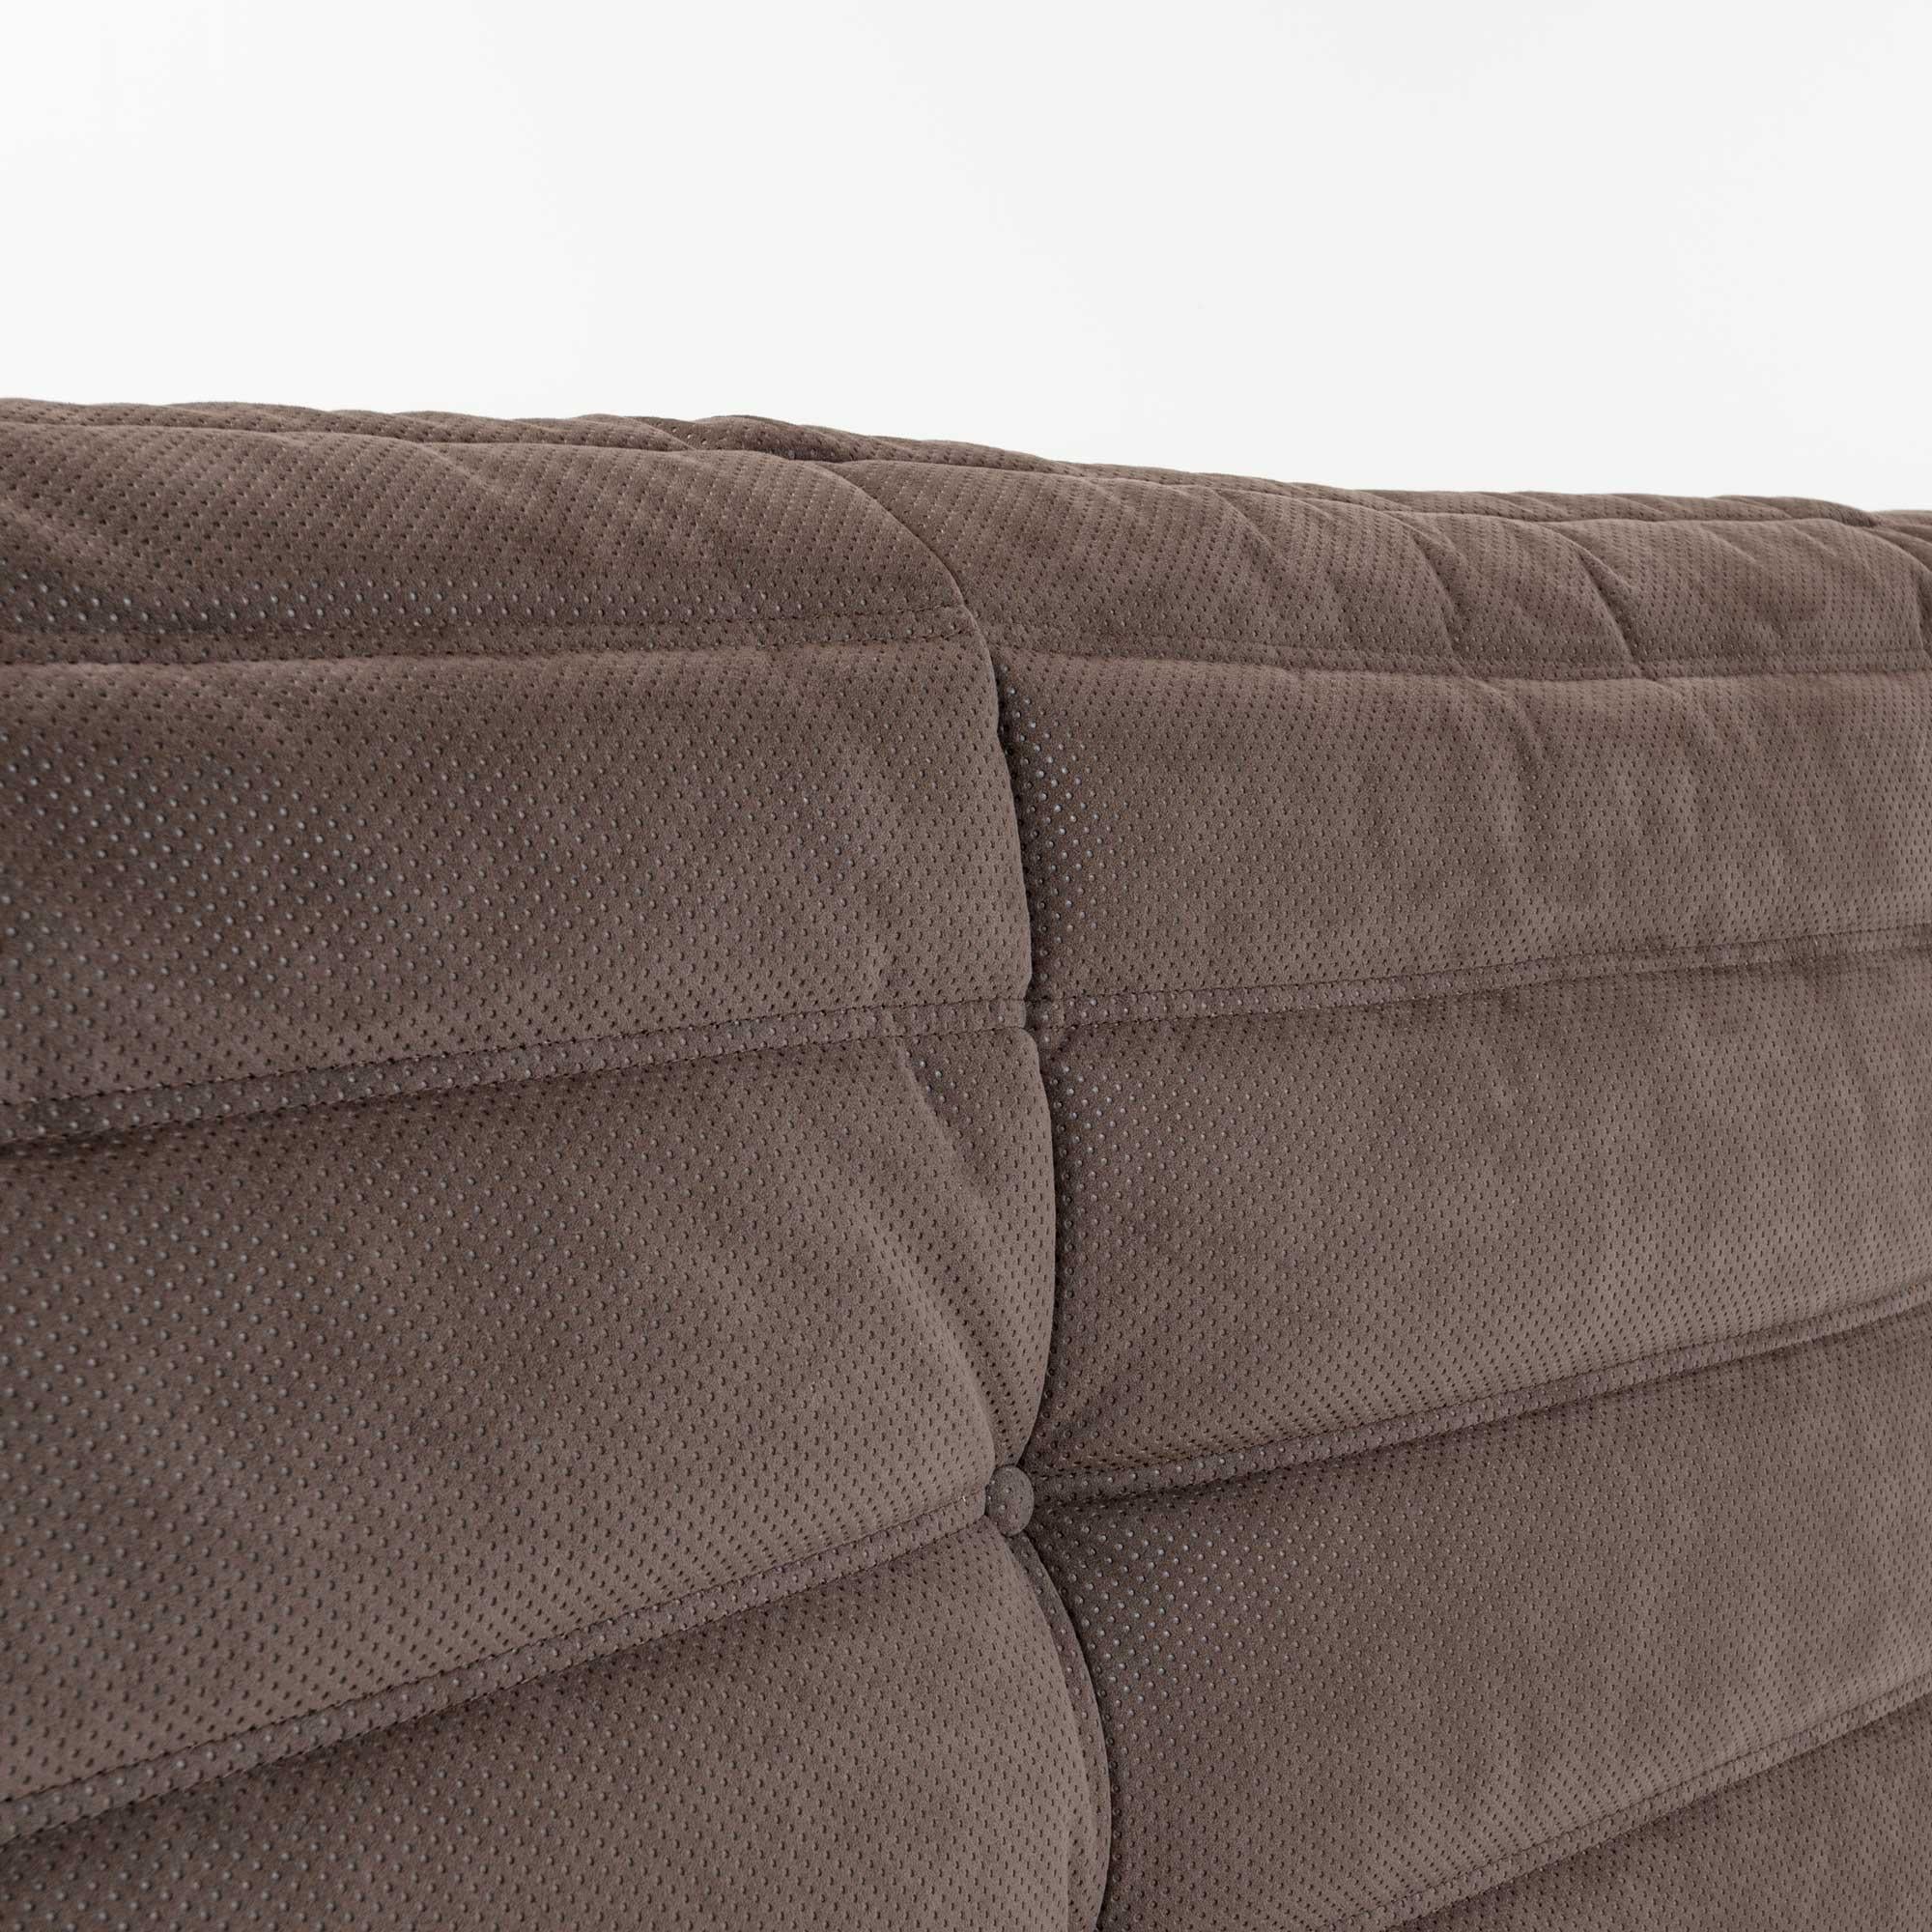 Organic Modern Michel Ducaroy's Togo Sofa with Arms in Brown Perforated Alcantara